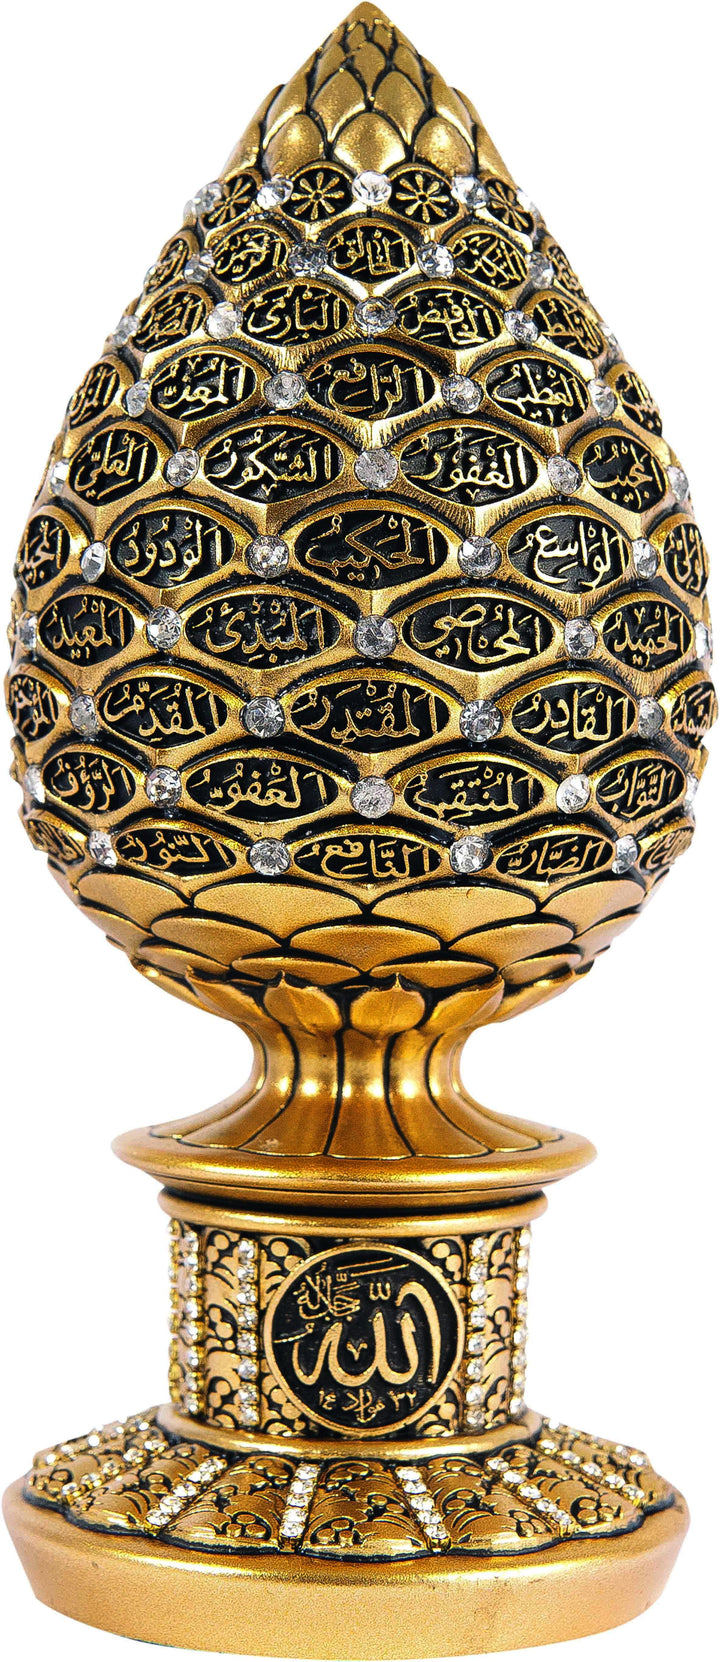 Islamic Table Decor Golden pine cone with Blue stones - 99 Names of Allah Alif collection BB-0913-1631-theislamicshop.com